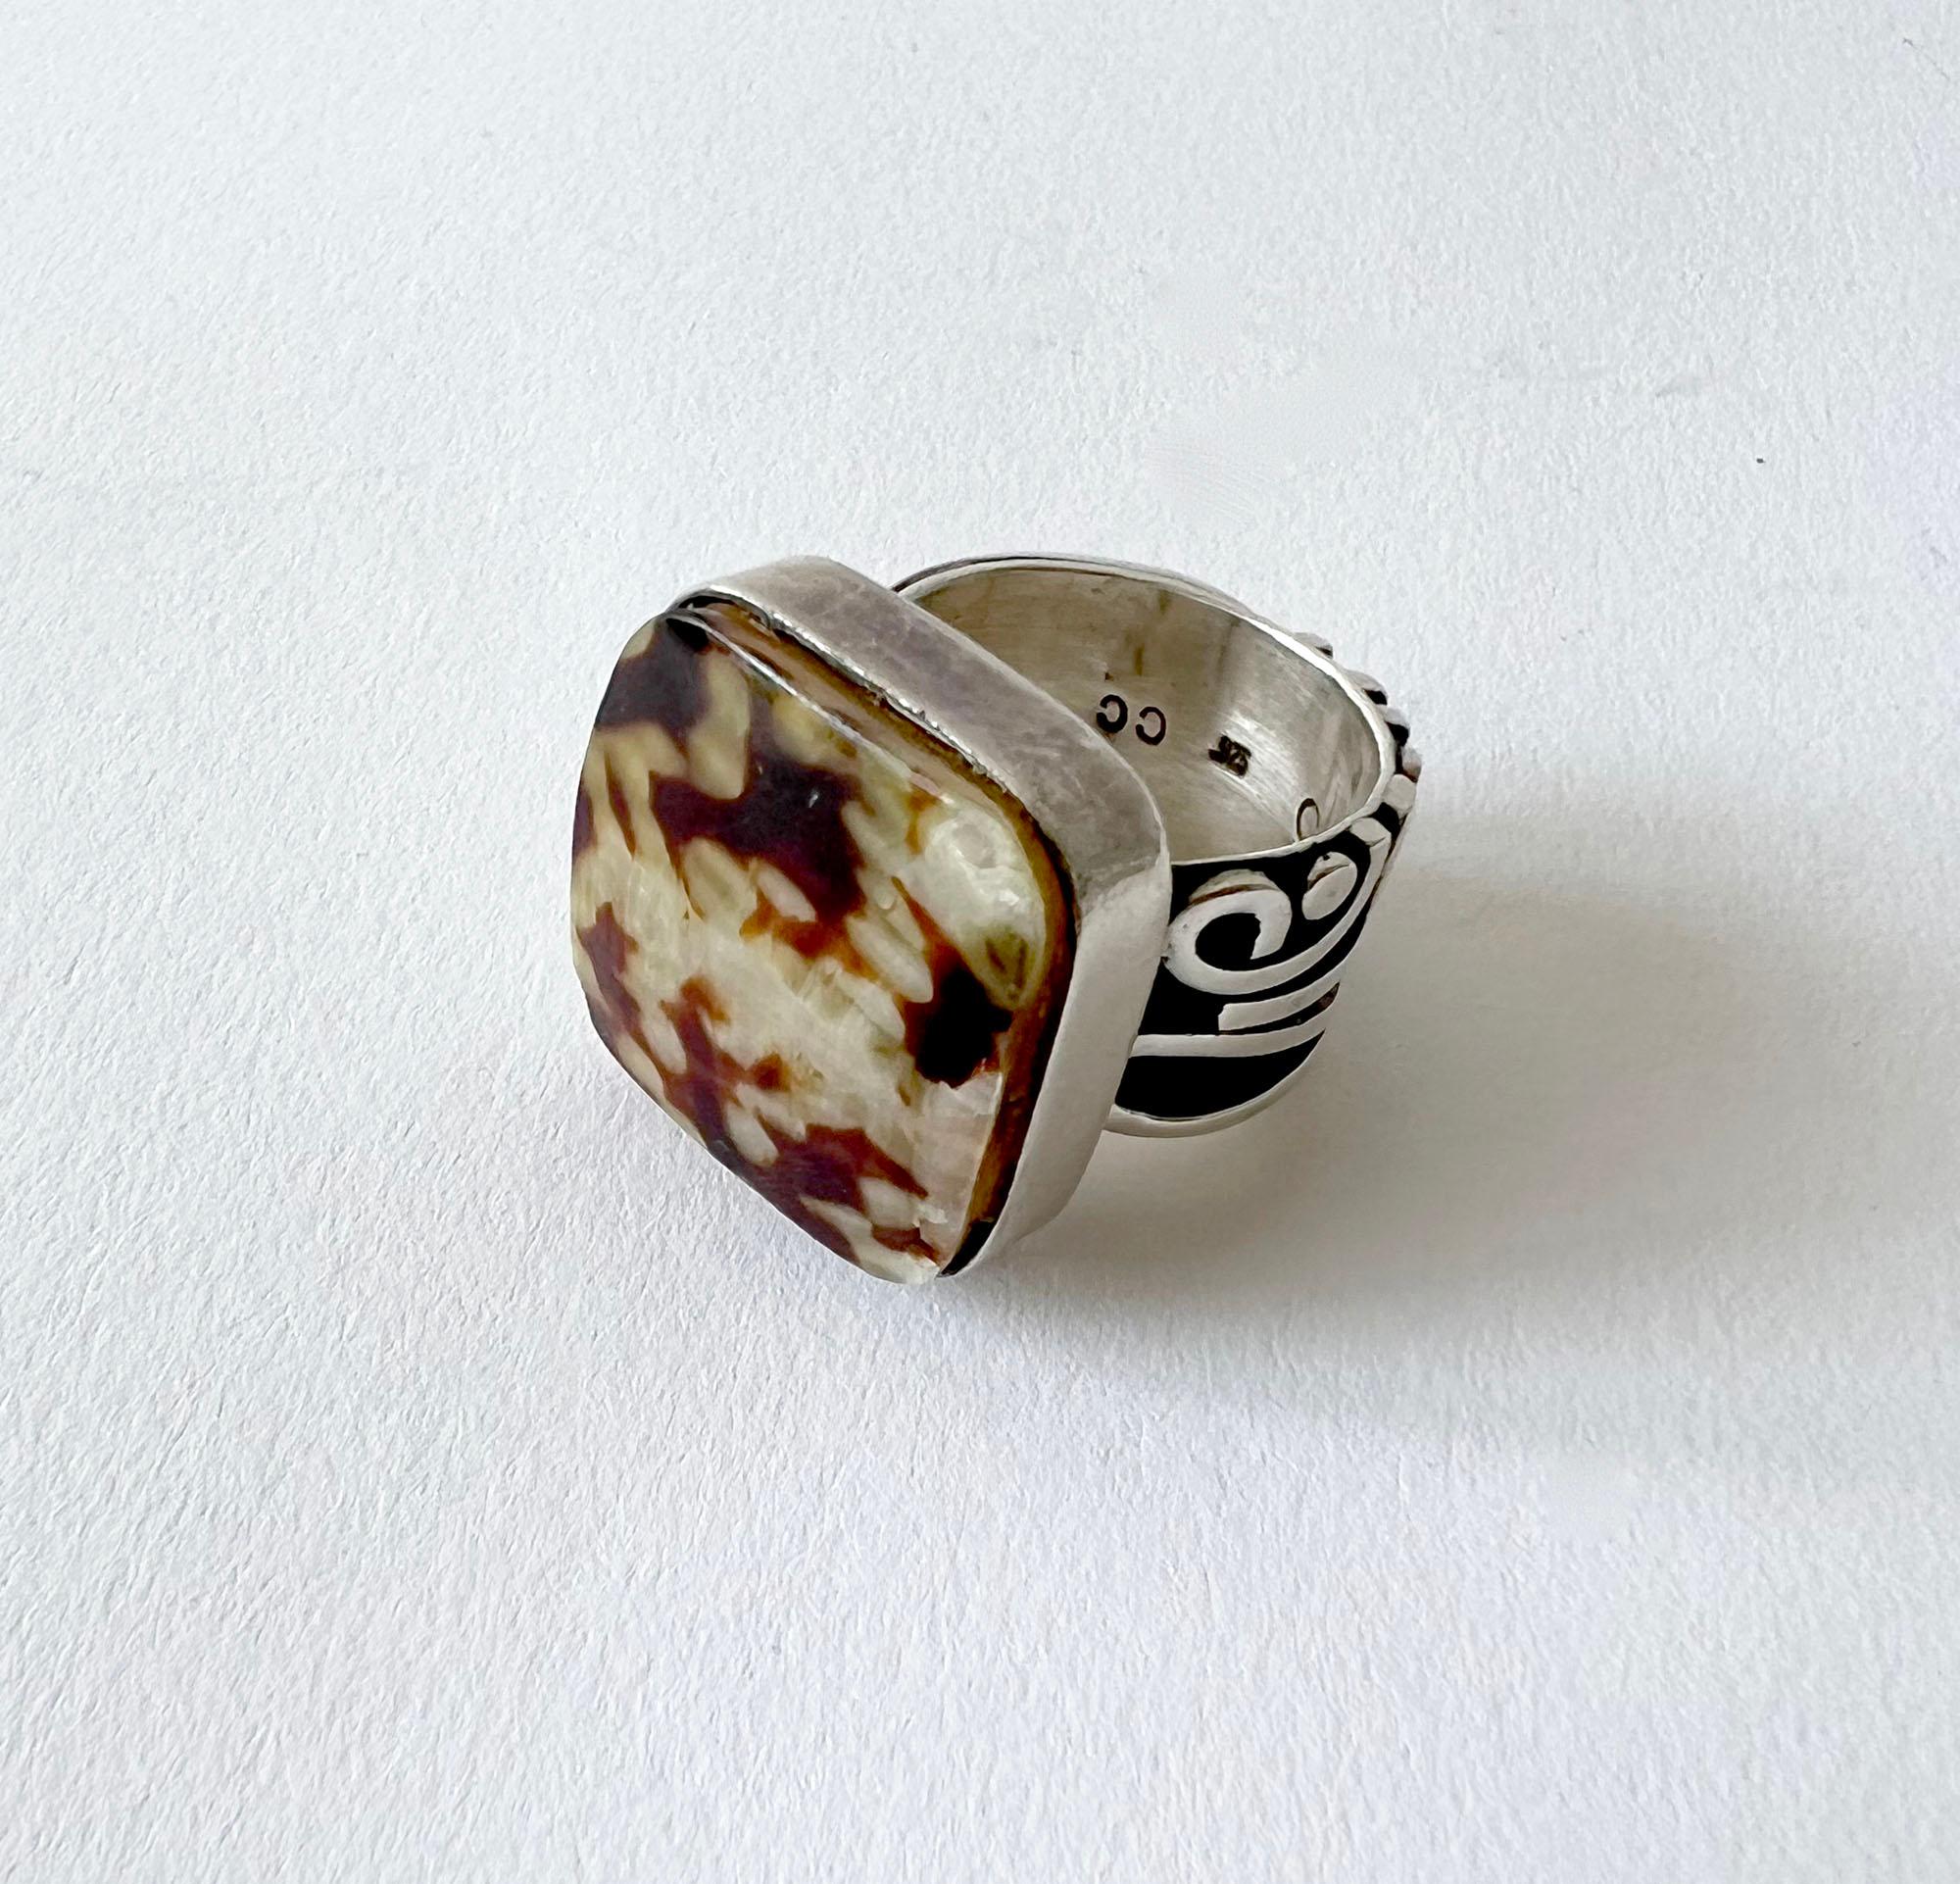 Handmade sterling silver modernist ring with natural flat, square stone or shell, suitable for a man or woman.  Ring is a finger size 9.  In  good vintage 1980s condition with some wear to the side of the stone.  Unknown maker.